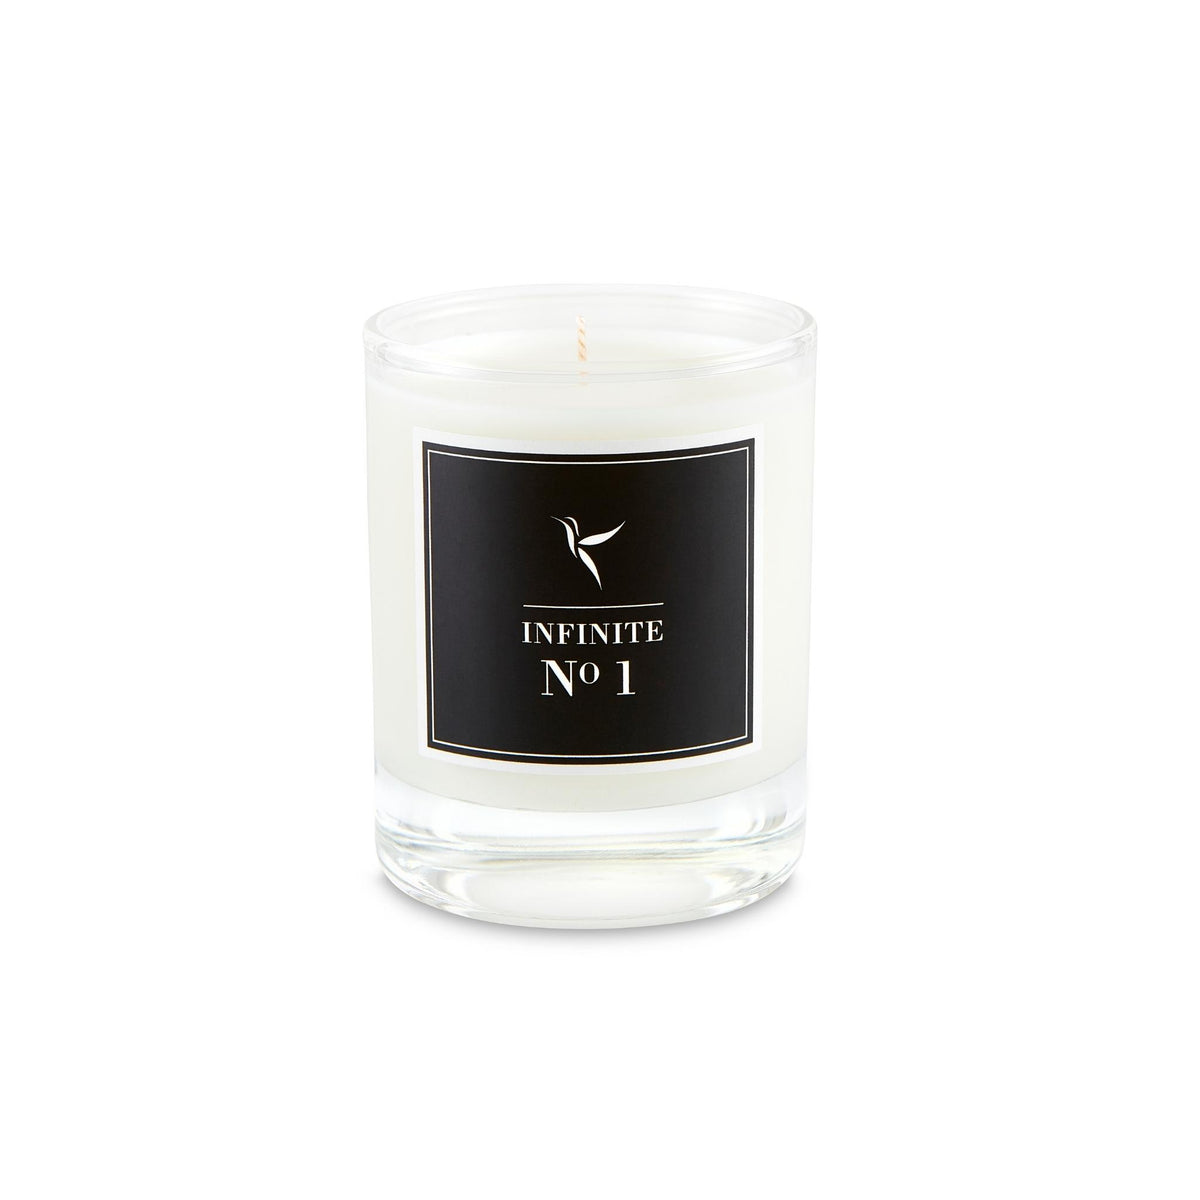 Infinite No 1 Travel Candle